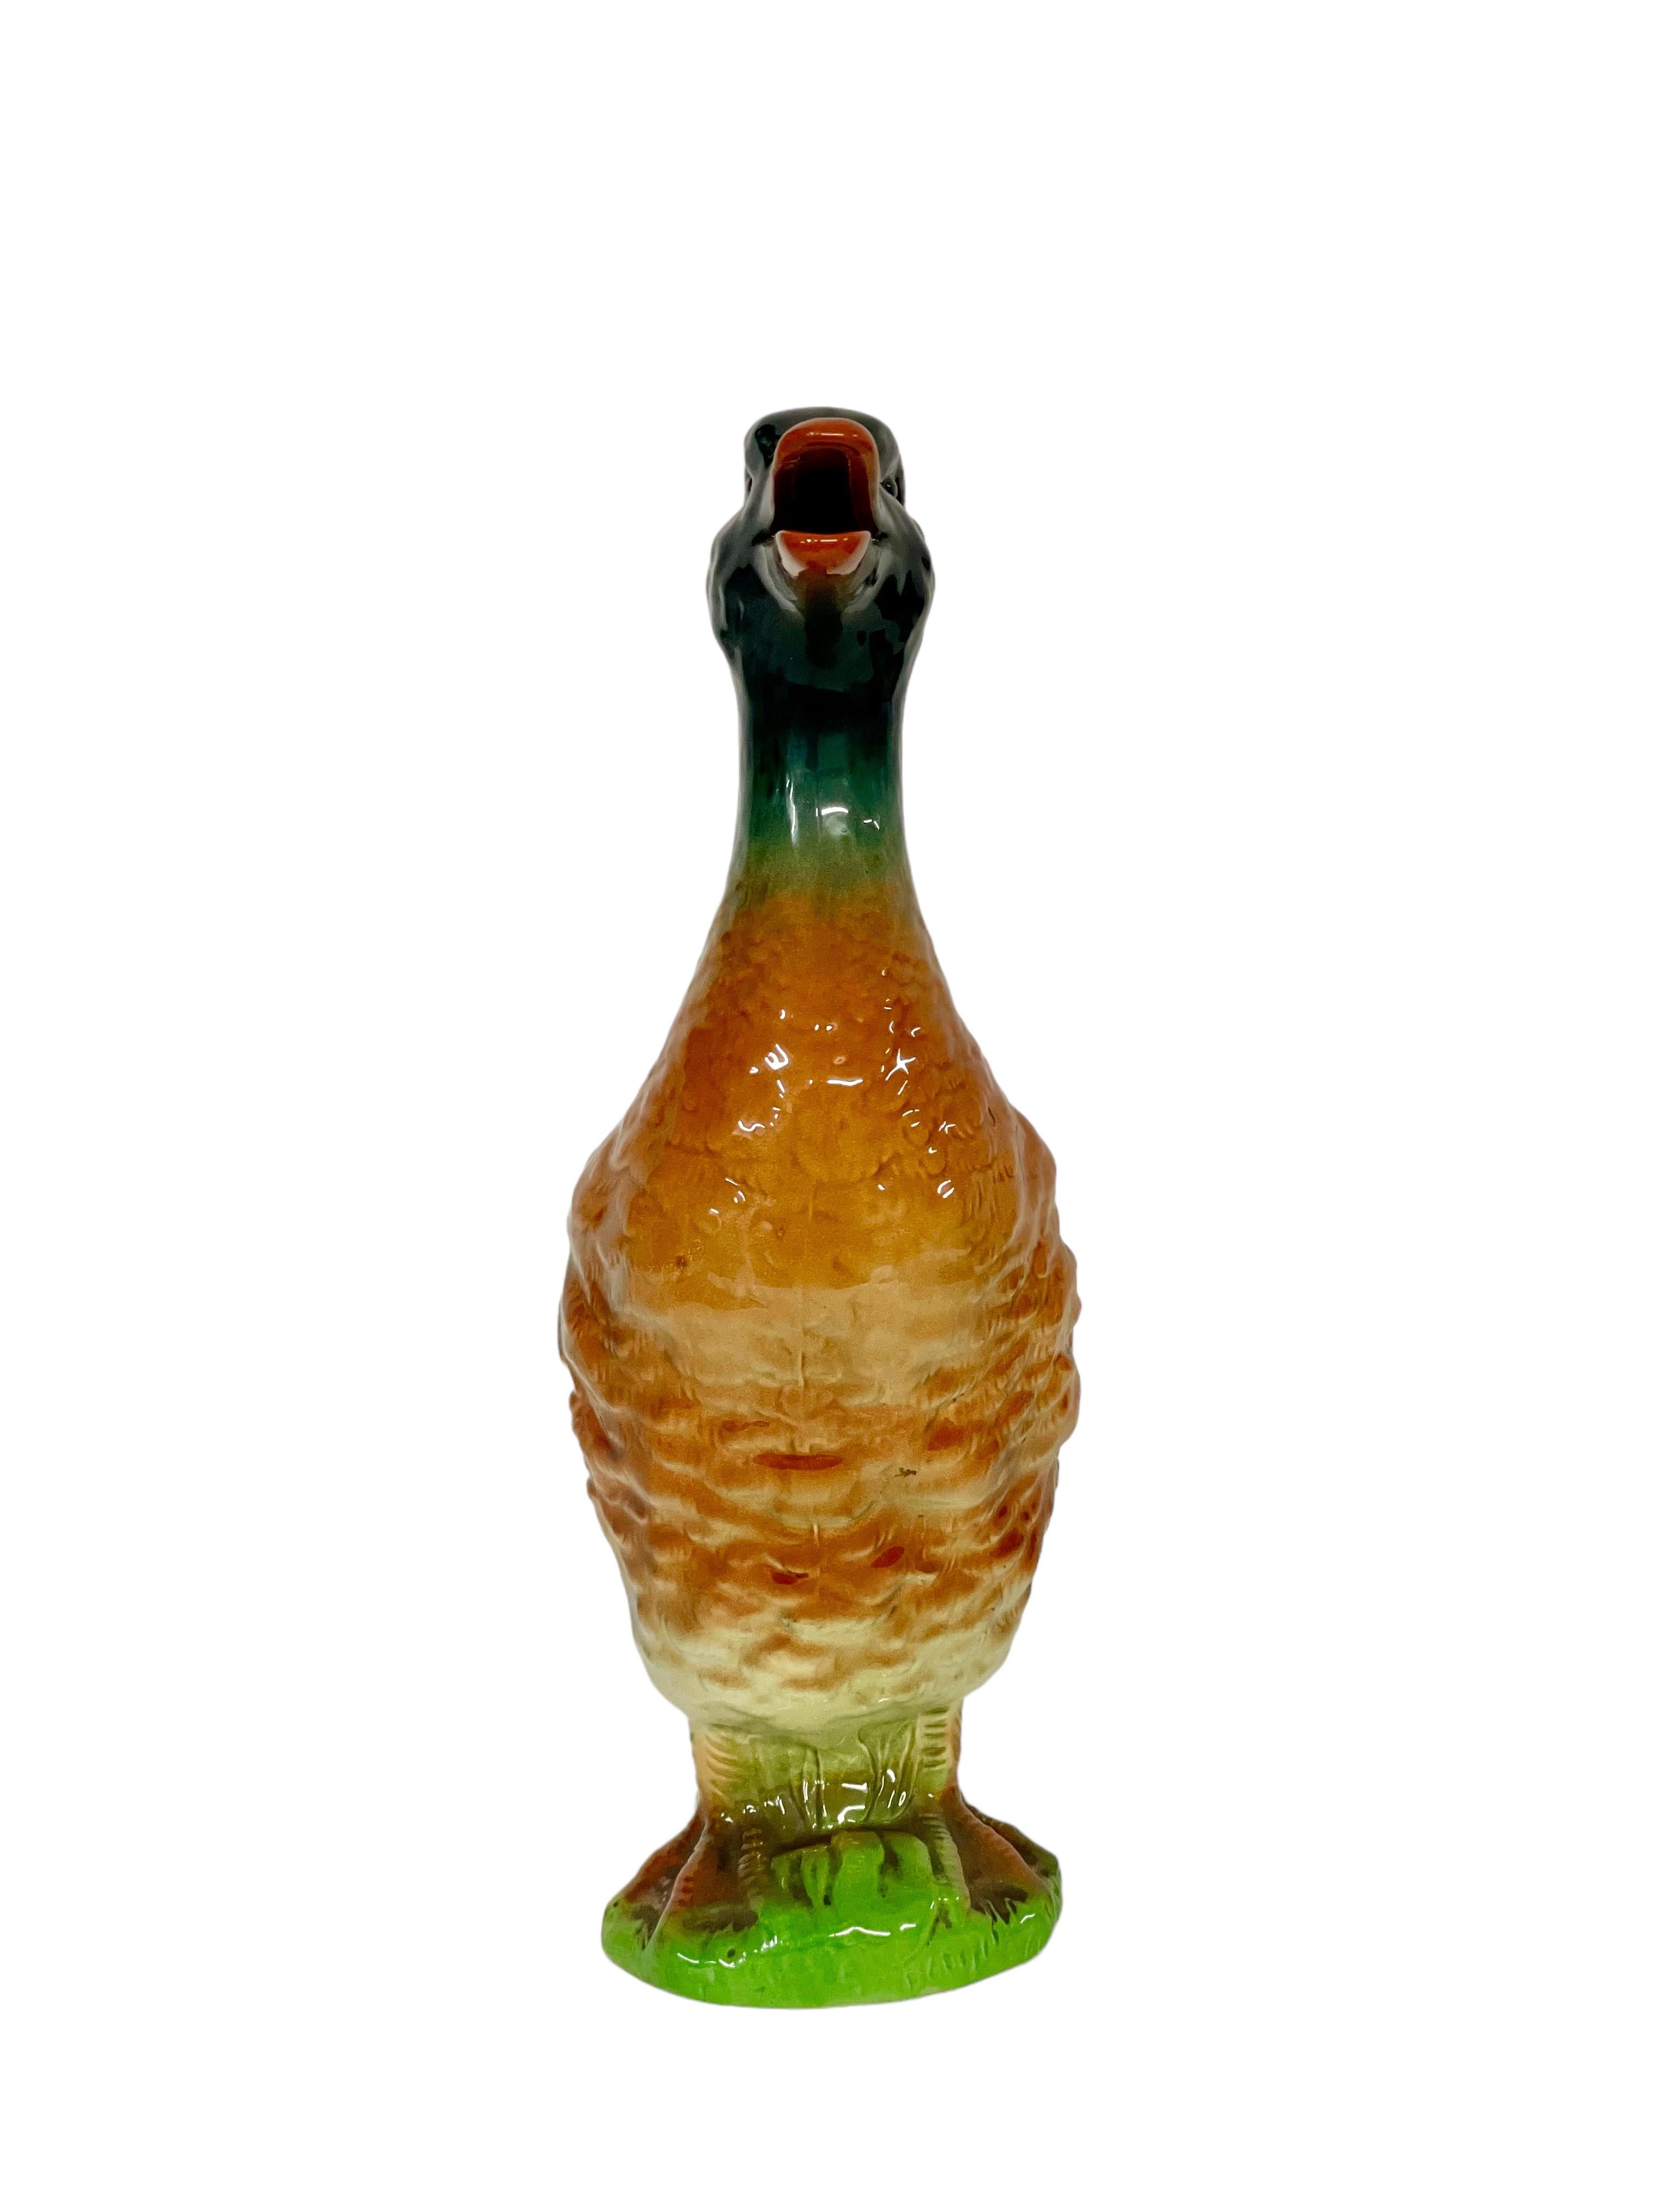 An unusual and very quirky vintage Majolica barbotine water or wine pitcher in the shape of a mallard duck, made by Keller et Guérin's earthenware factory at Saint Clément, near Lunéville, in north-eastern France around the turn of the 20th century.